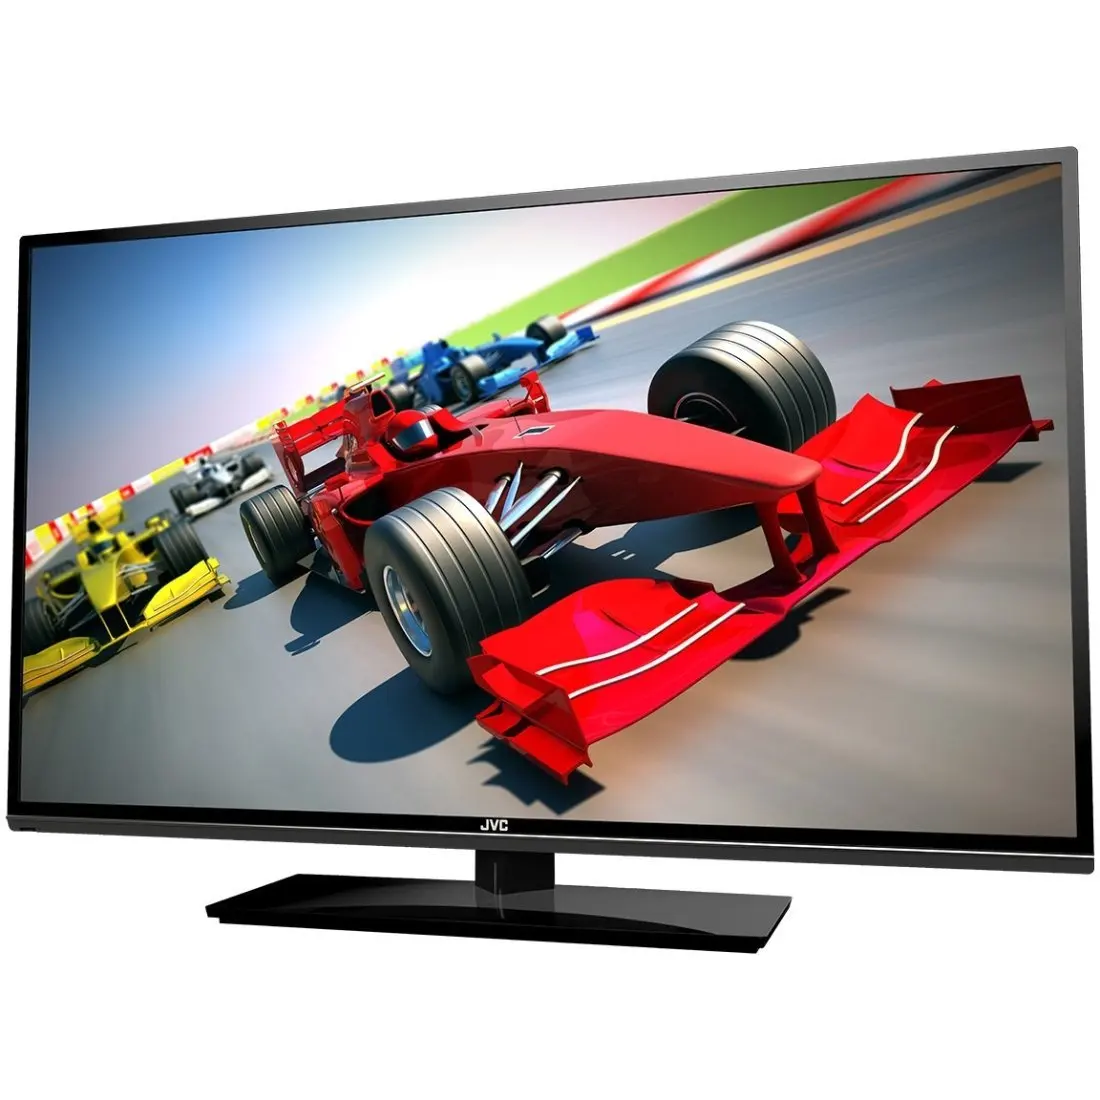 Cheap Jvc 32 Inch Led Tv Review Find Jvc 32 Inch Led Tv Review